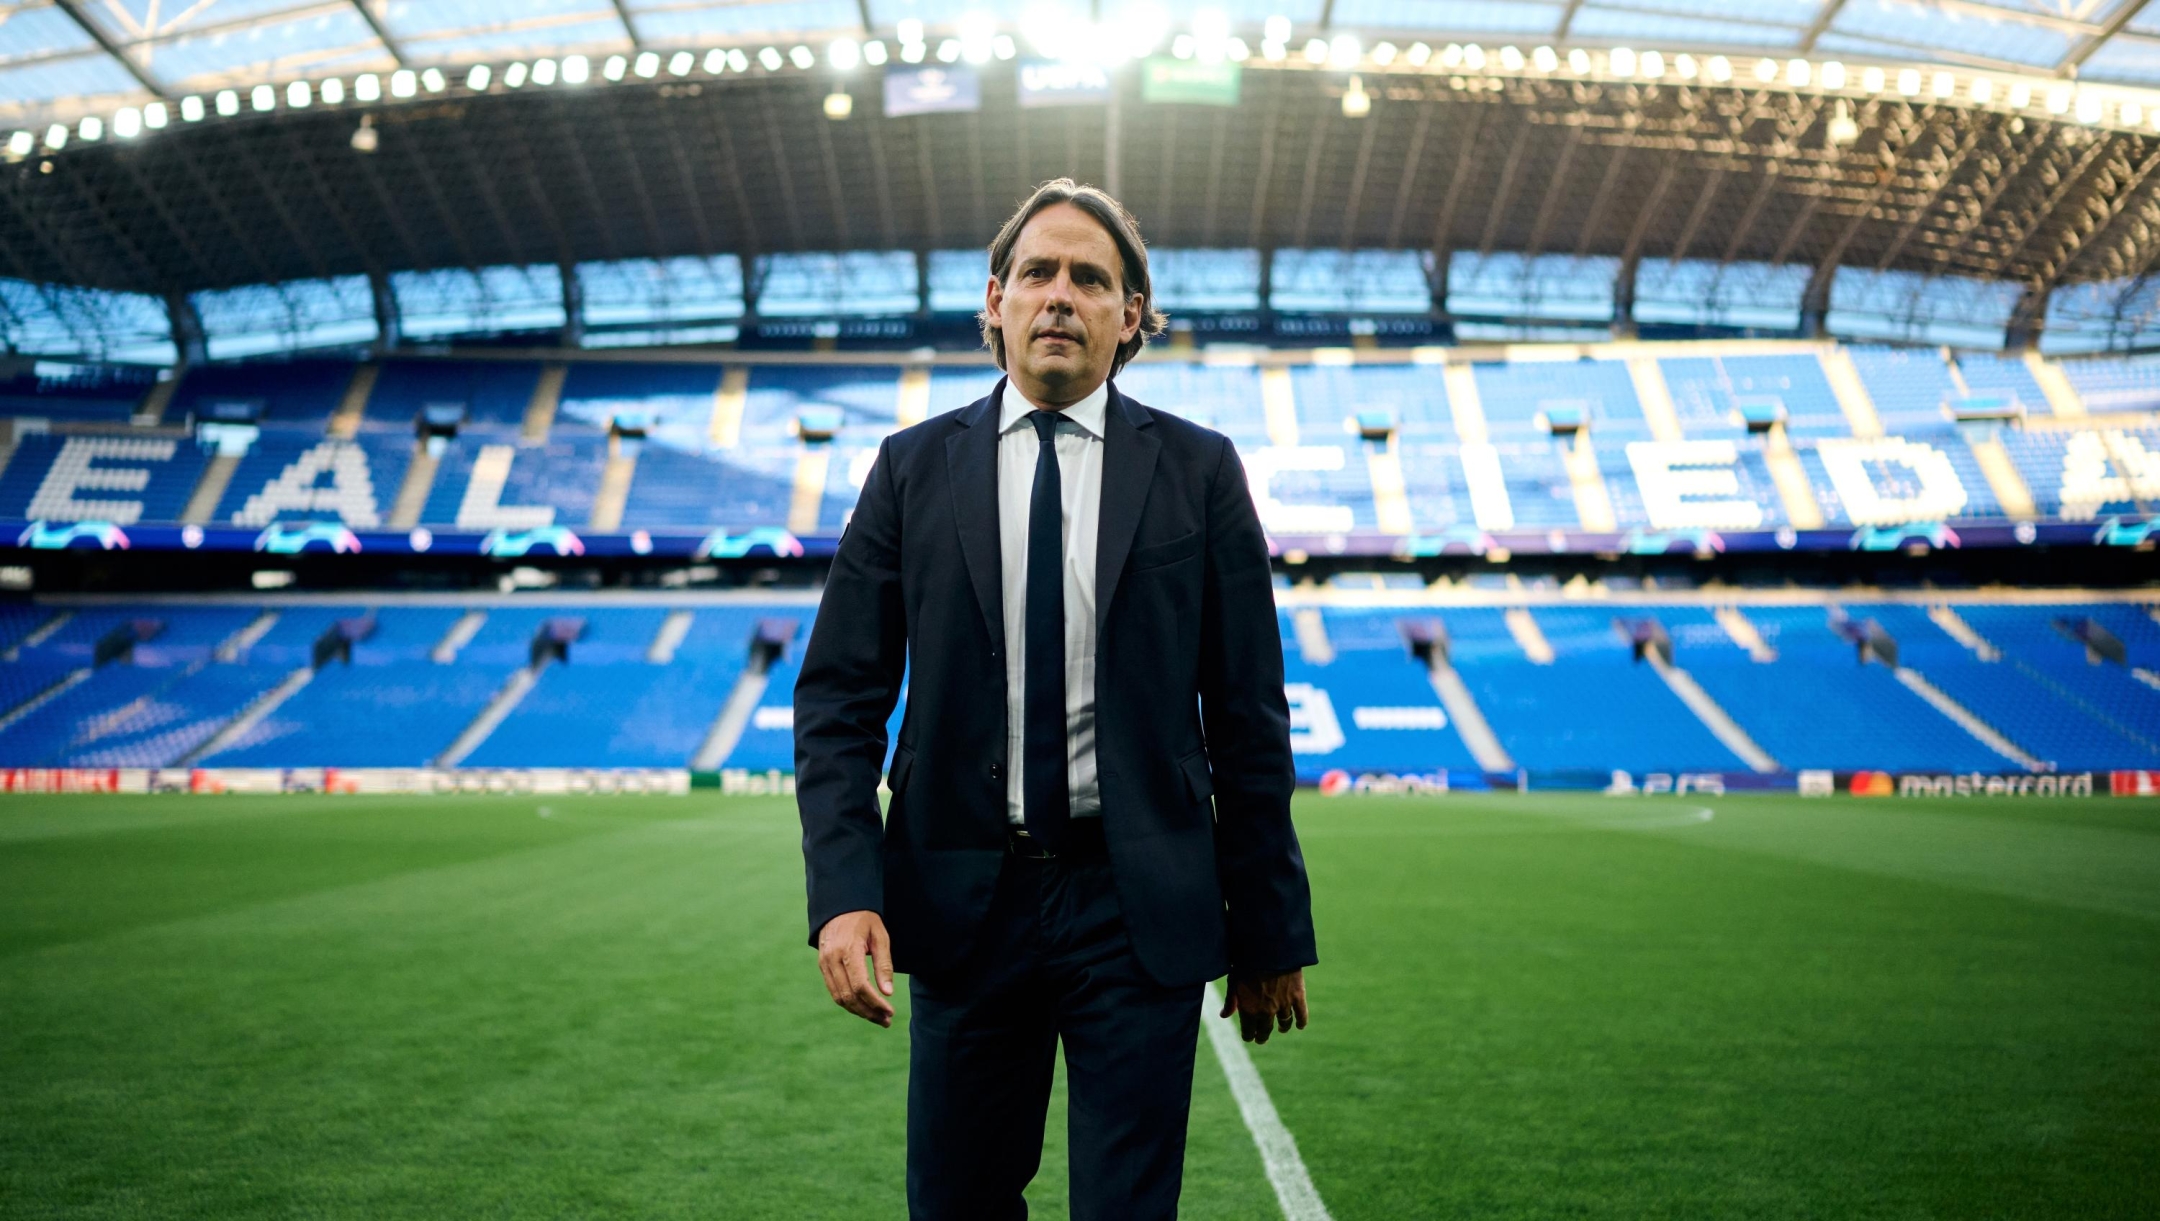 SAN SEBASTIAN, SPAIN - SEPTEMBER 19: Head Coach Simone Inzaghi of FC Internazionale looks on ahead the UEFA Champions League match group D between Real Sociedad and FC Internazionale at Reale Arena on September 19, 2023 in San Sebastian, Spain. (Photo by Mattia Ozbot - Inter/Inter via Getty Images)